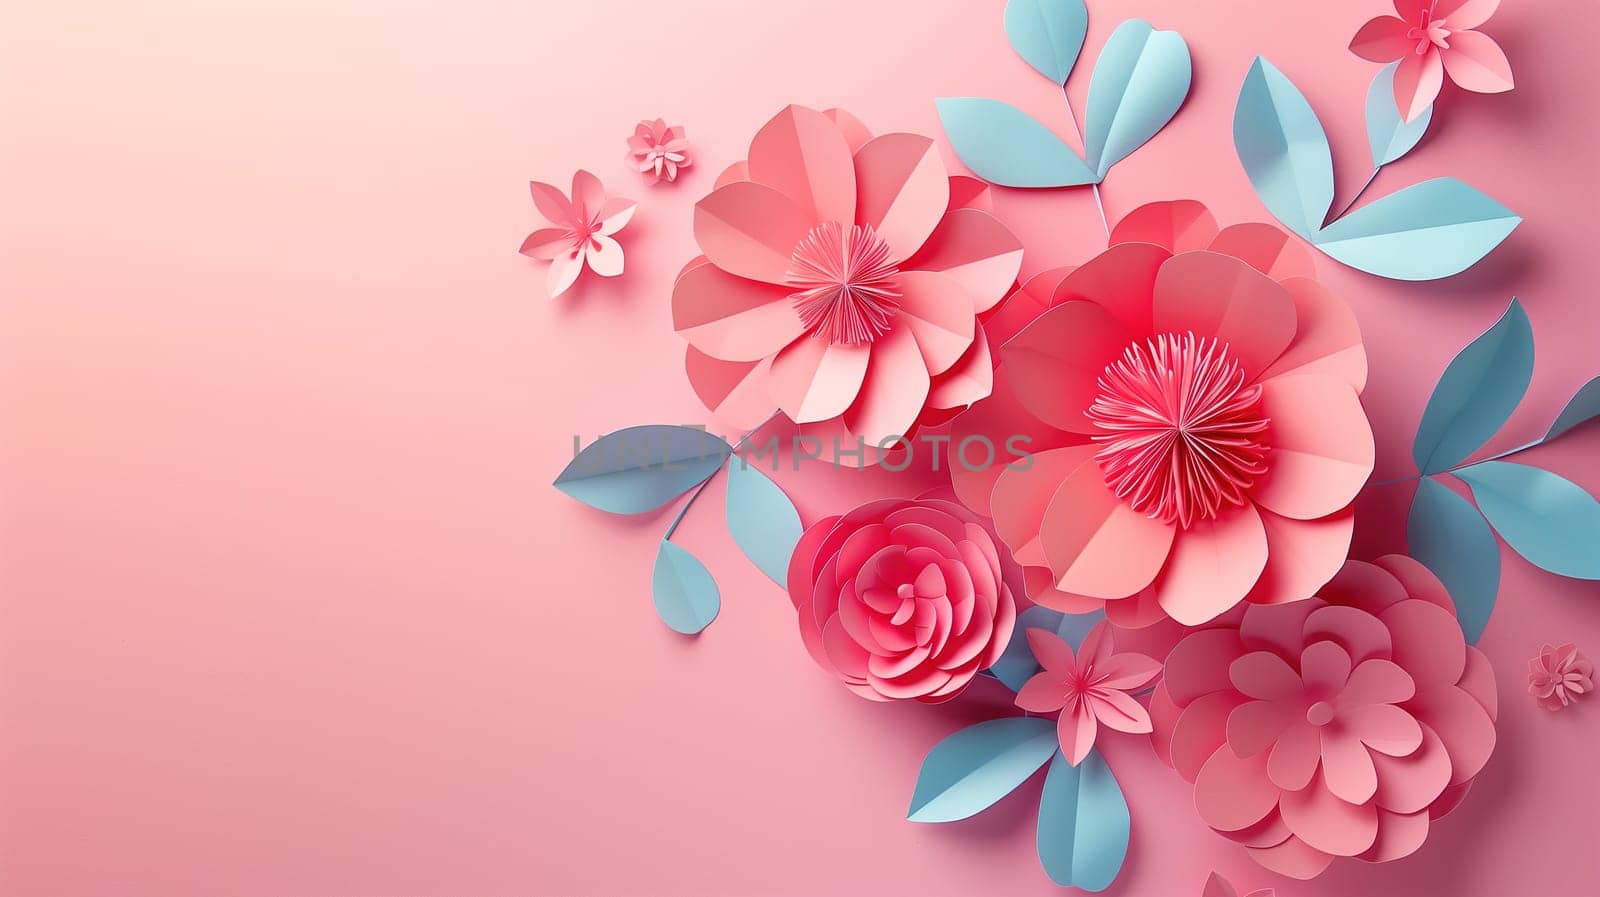 A collection of paper flowers in various colors spread elegantly on a soft pink background. The flowers are neatly placed in a bunch, creating a vibrant and cheerful display.